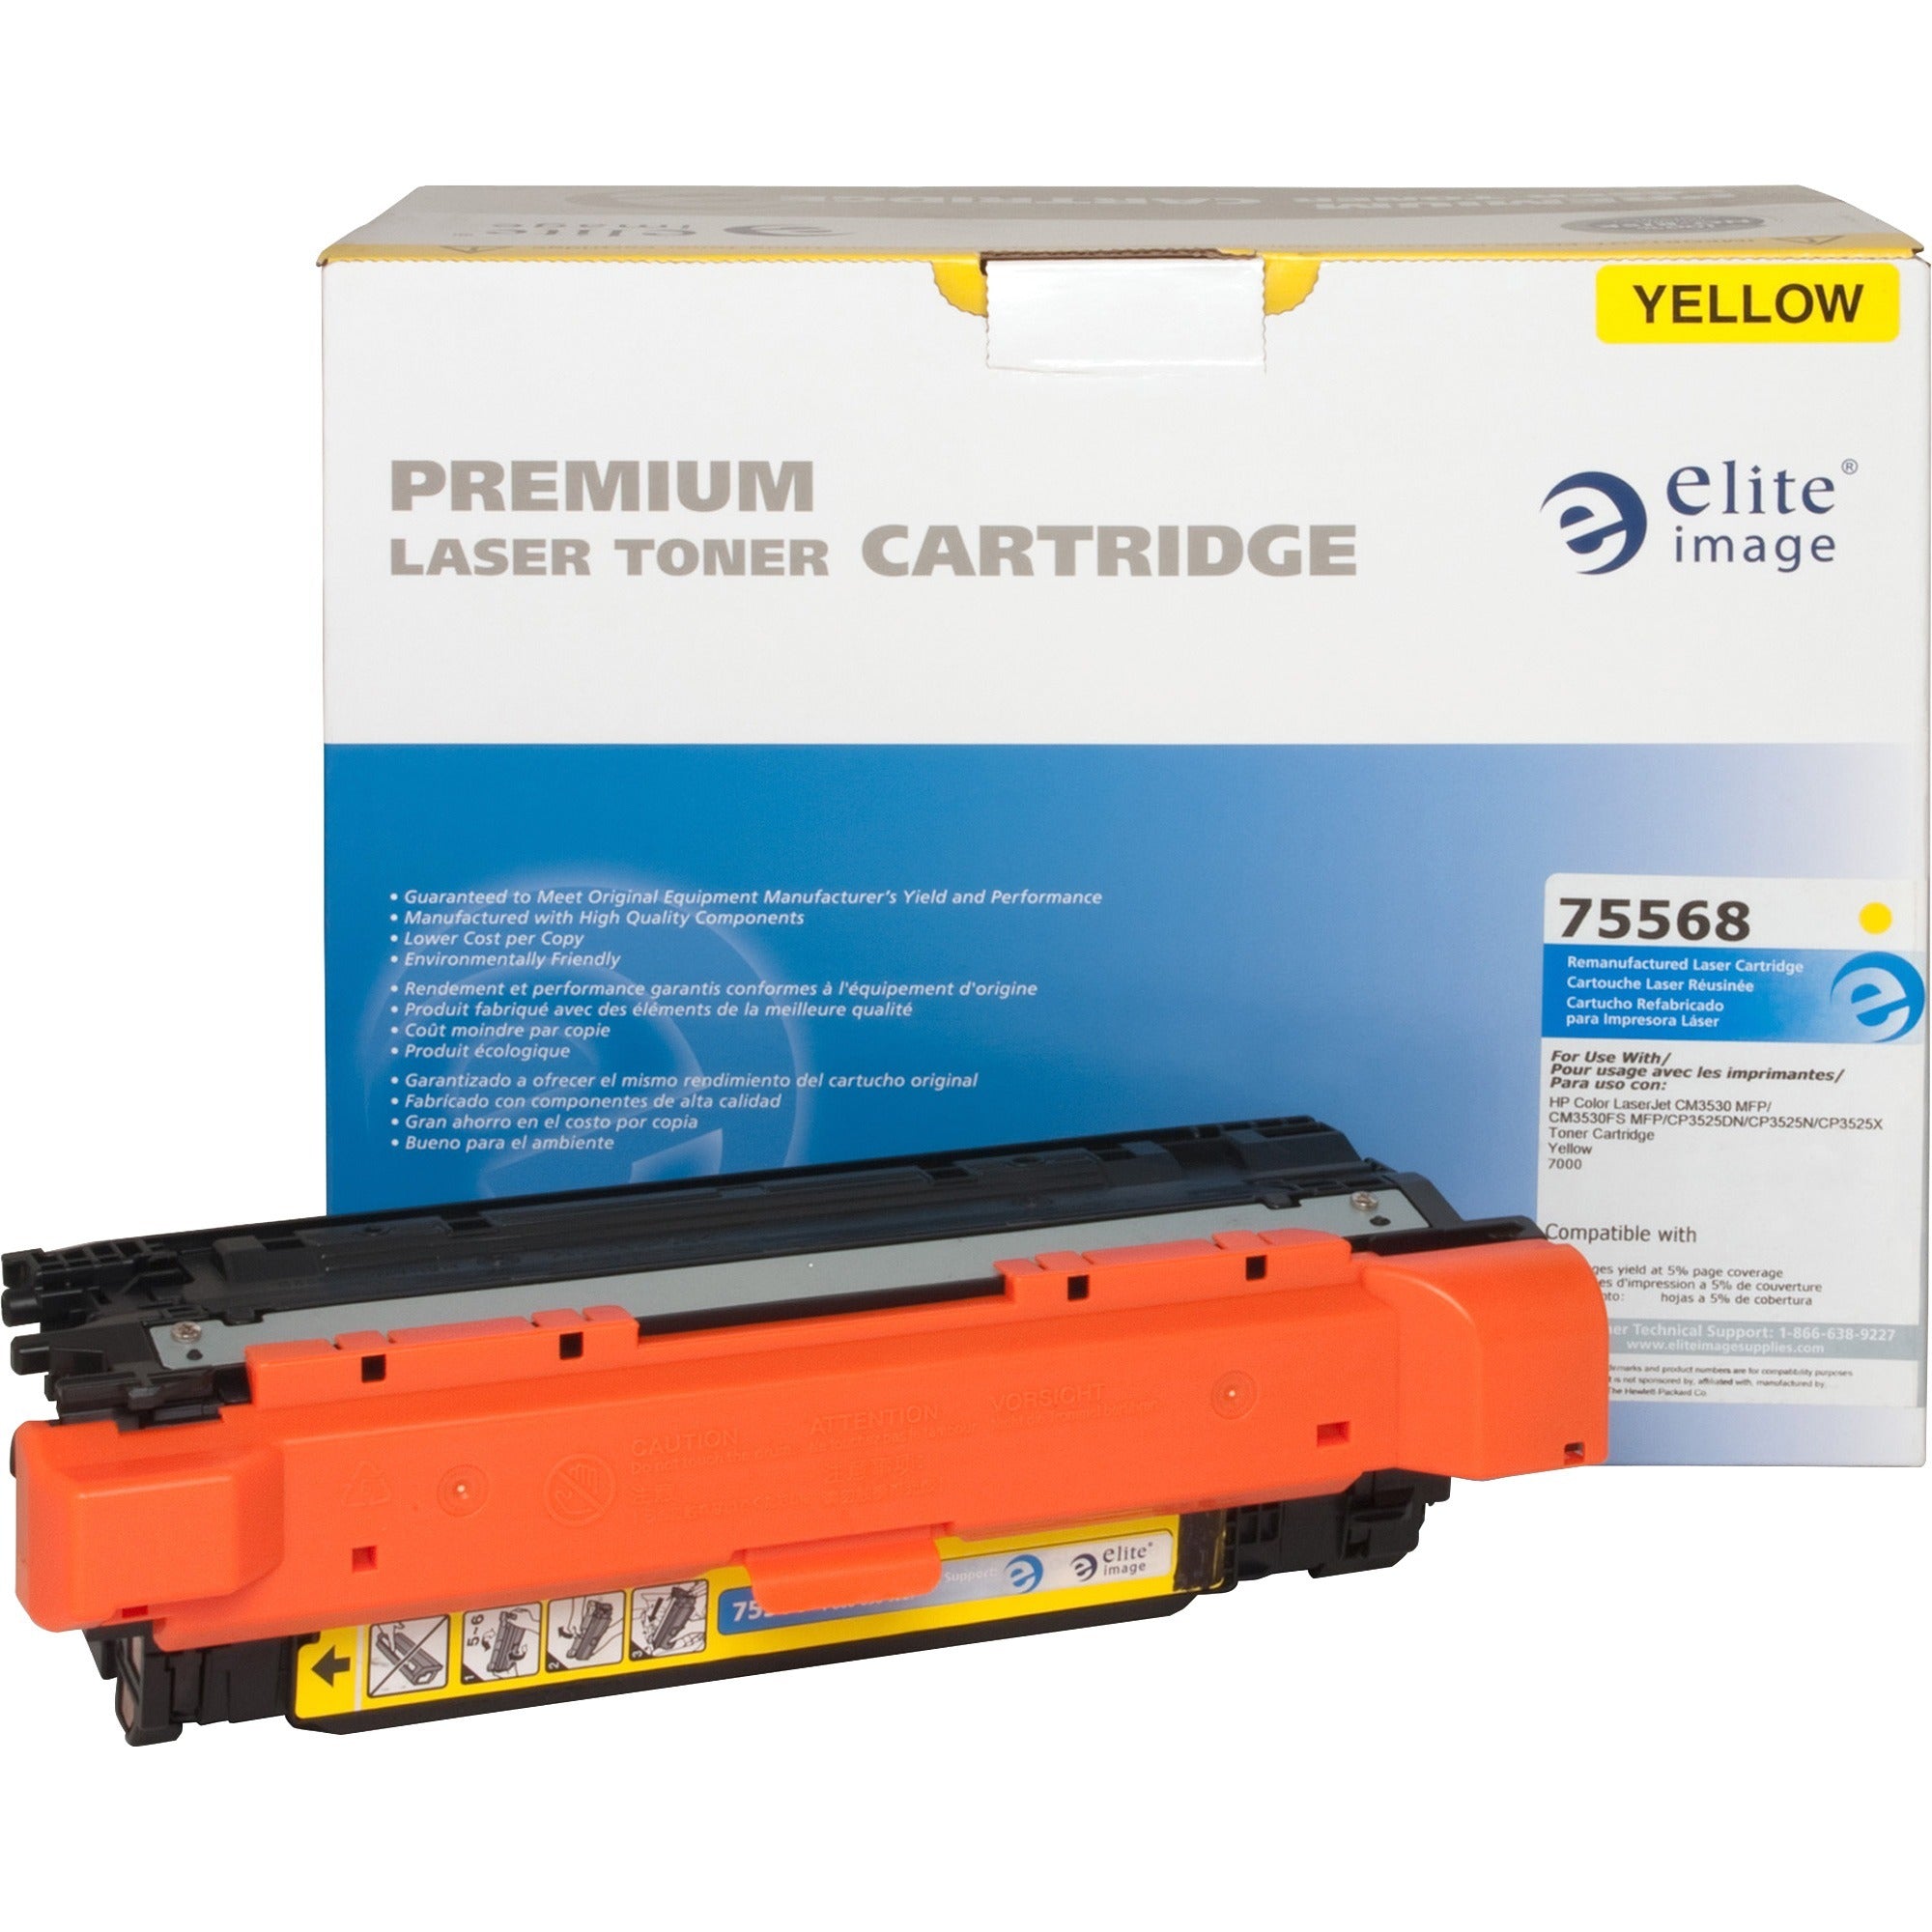 Elite Image Remanufactured Laser Toner Cartridge - Alternative for HP 504A (CE252A) - Yellow - 1 Each - 7000 Pages - 1